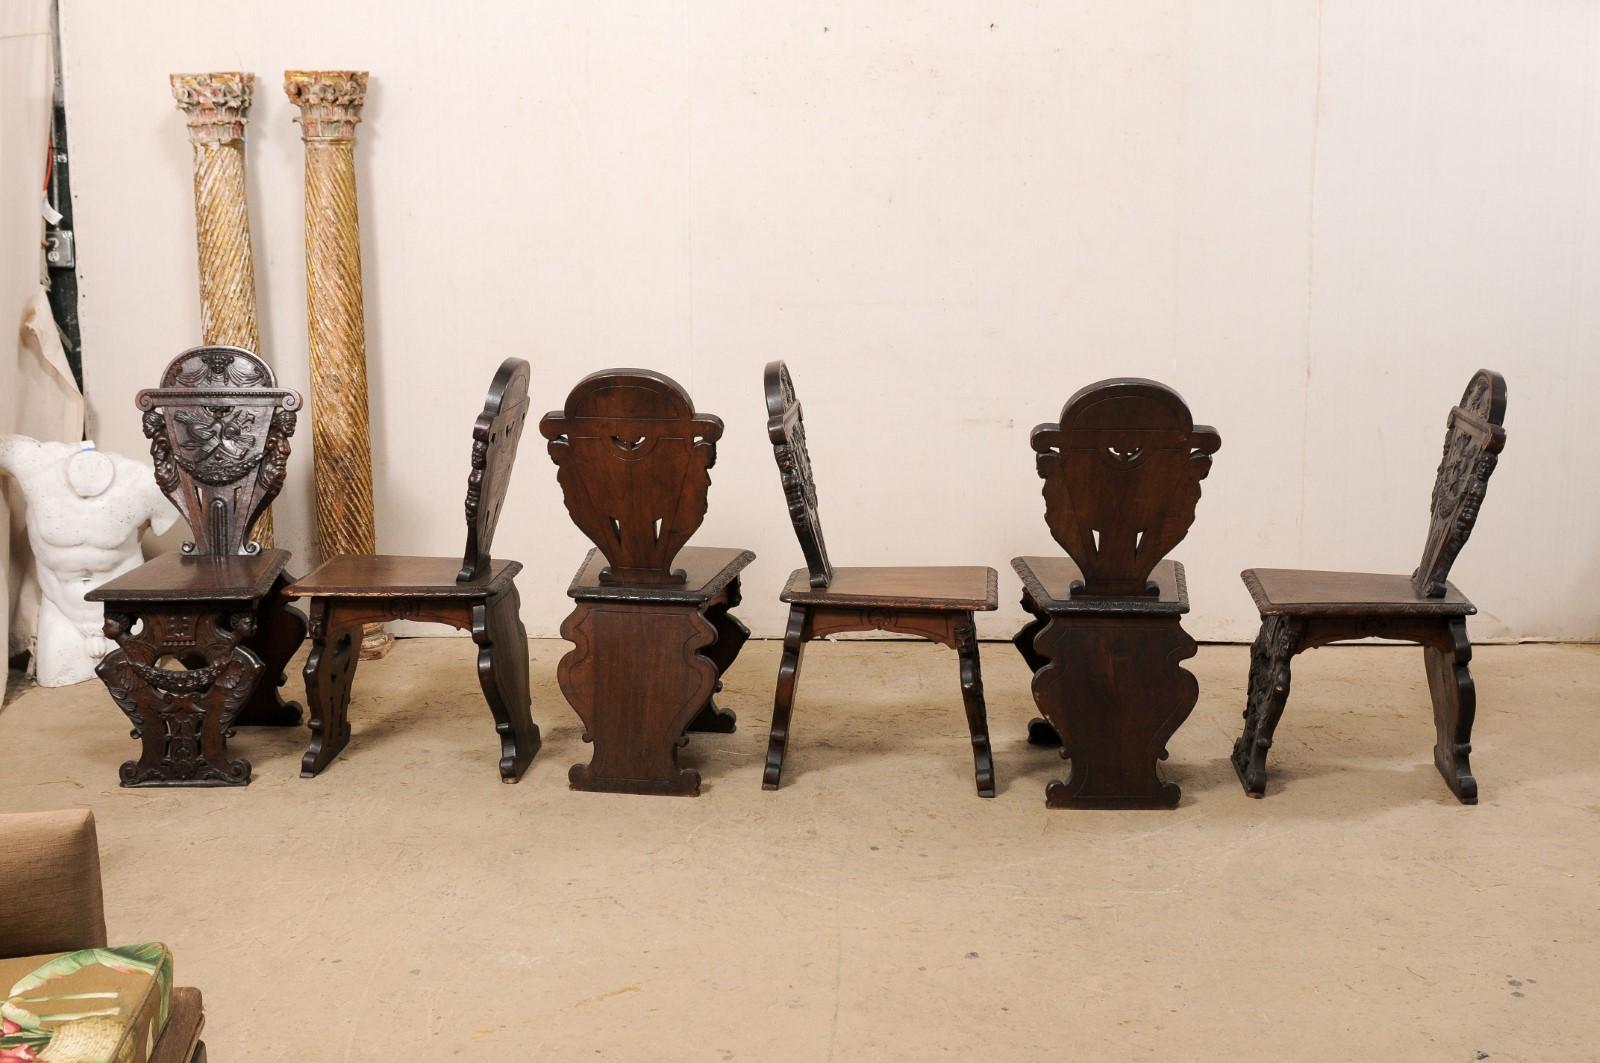 Set of 6 English Renaissance Ornately-Carved Hall Chairs, Turn of 19th & 20th C For Sale 8